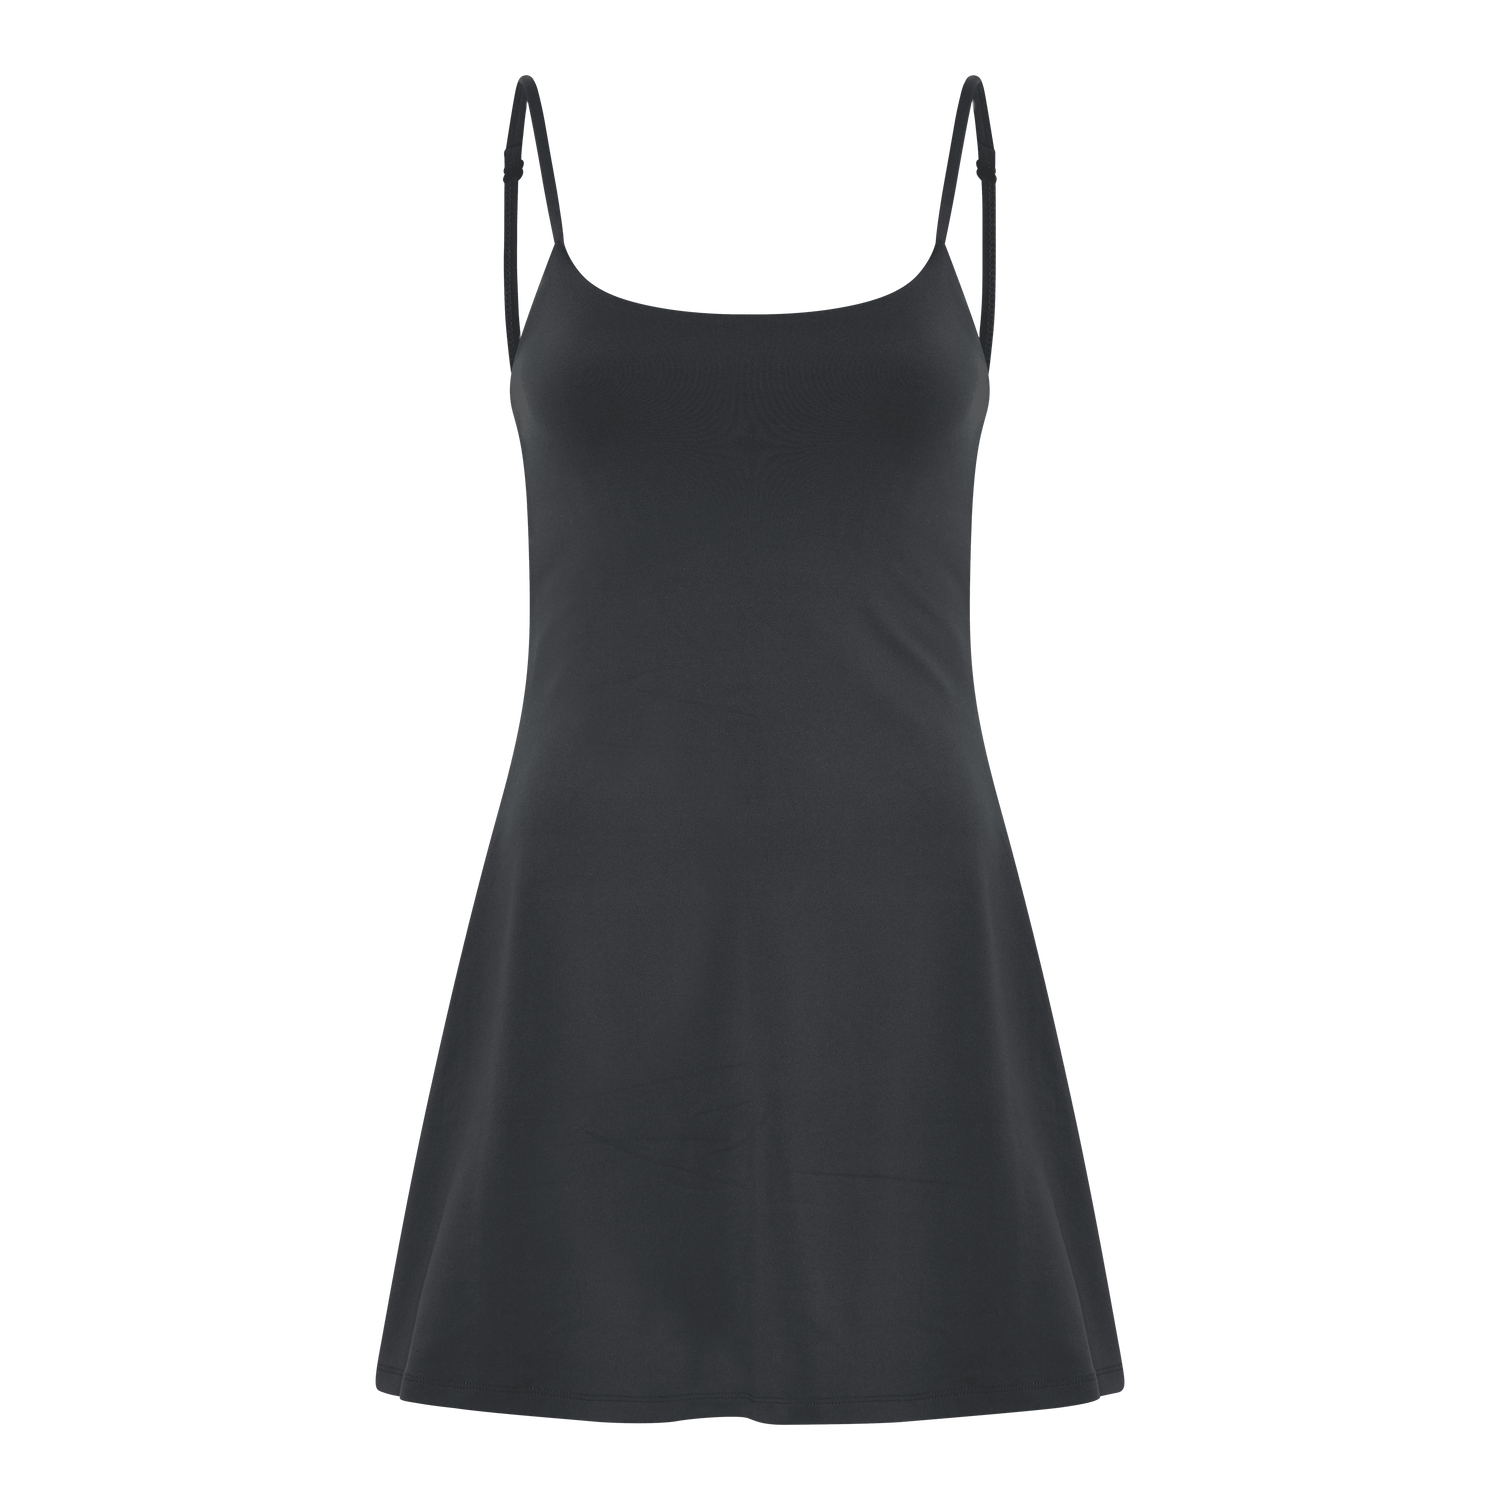 Girlfriend Collective Float Juliet Strappy Dress - Recycled Polyester Black Dress